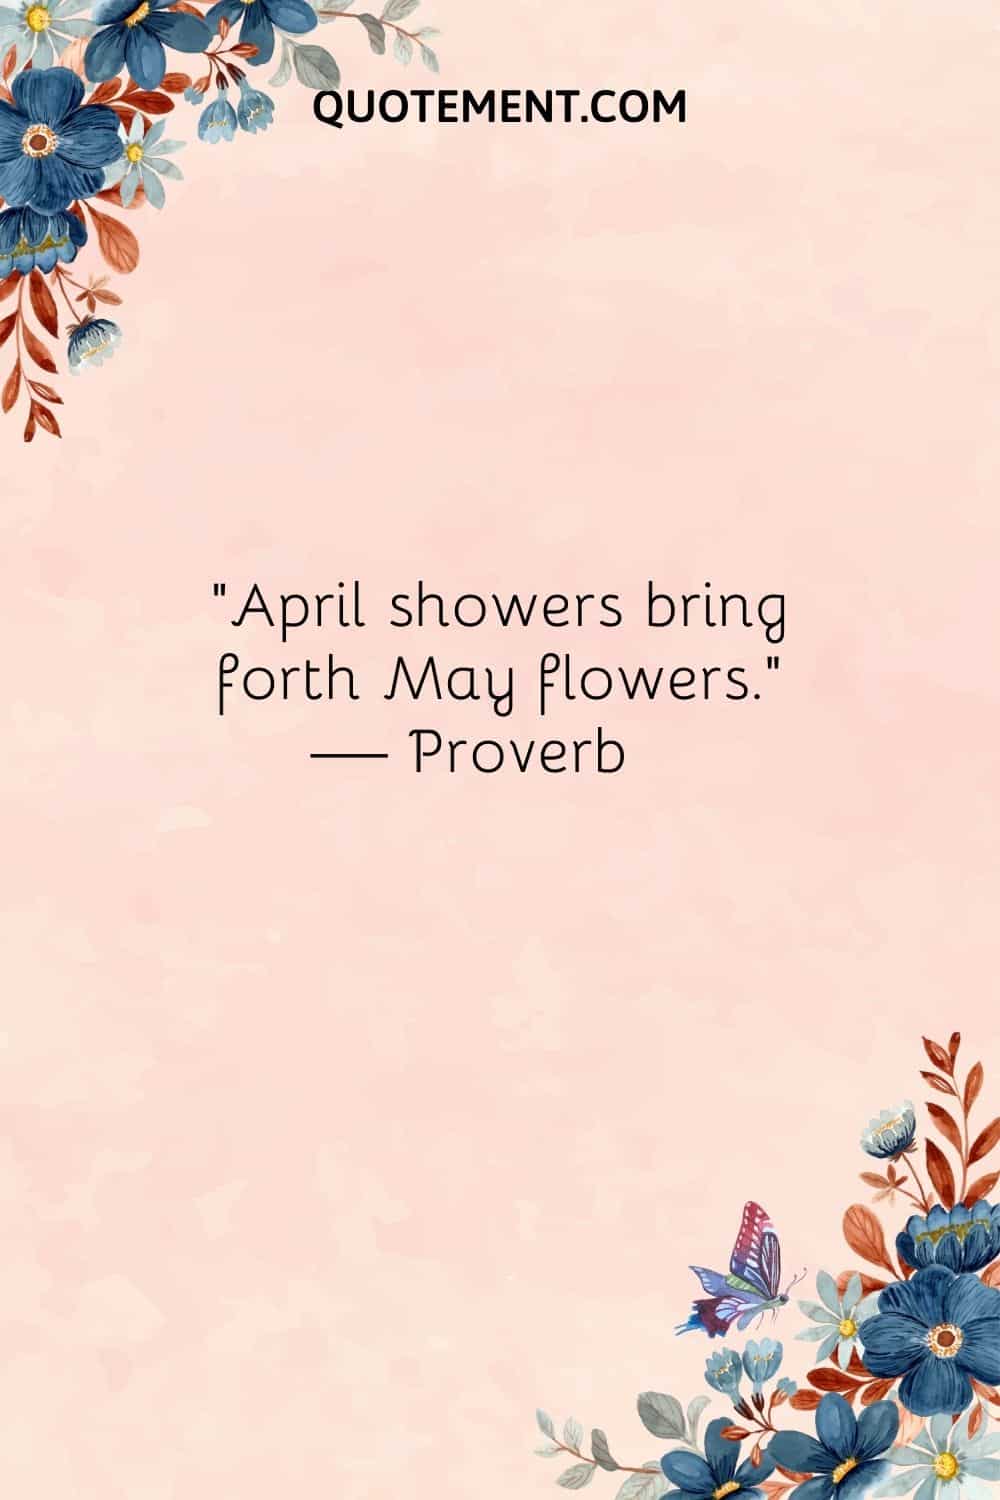 flowers and a butterfly image representing the best April quote